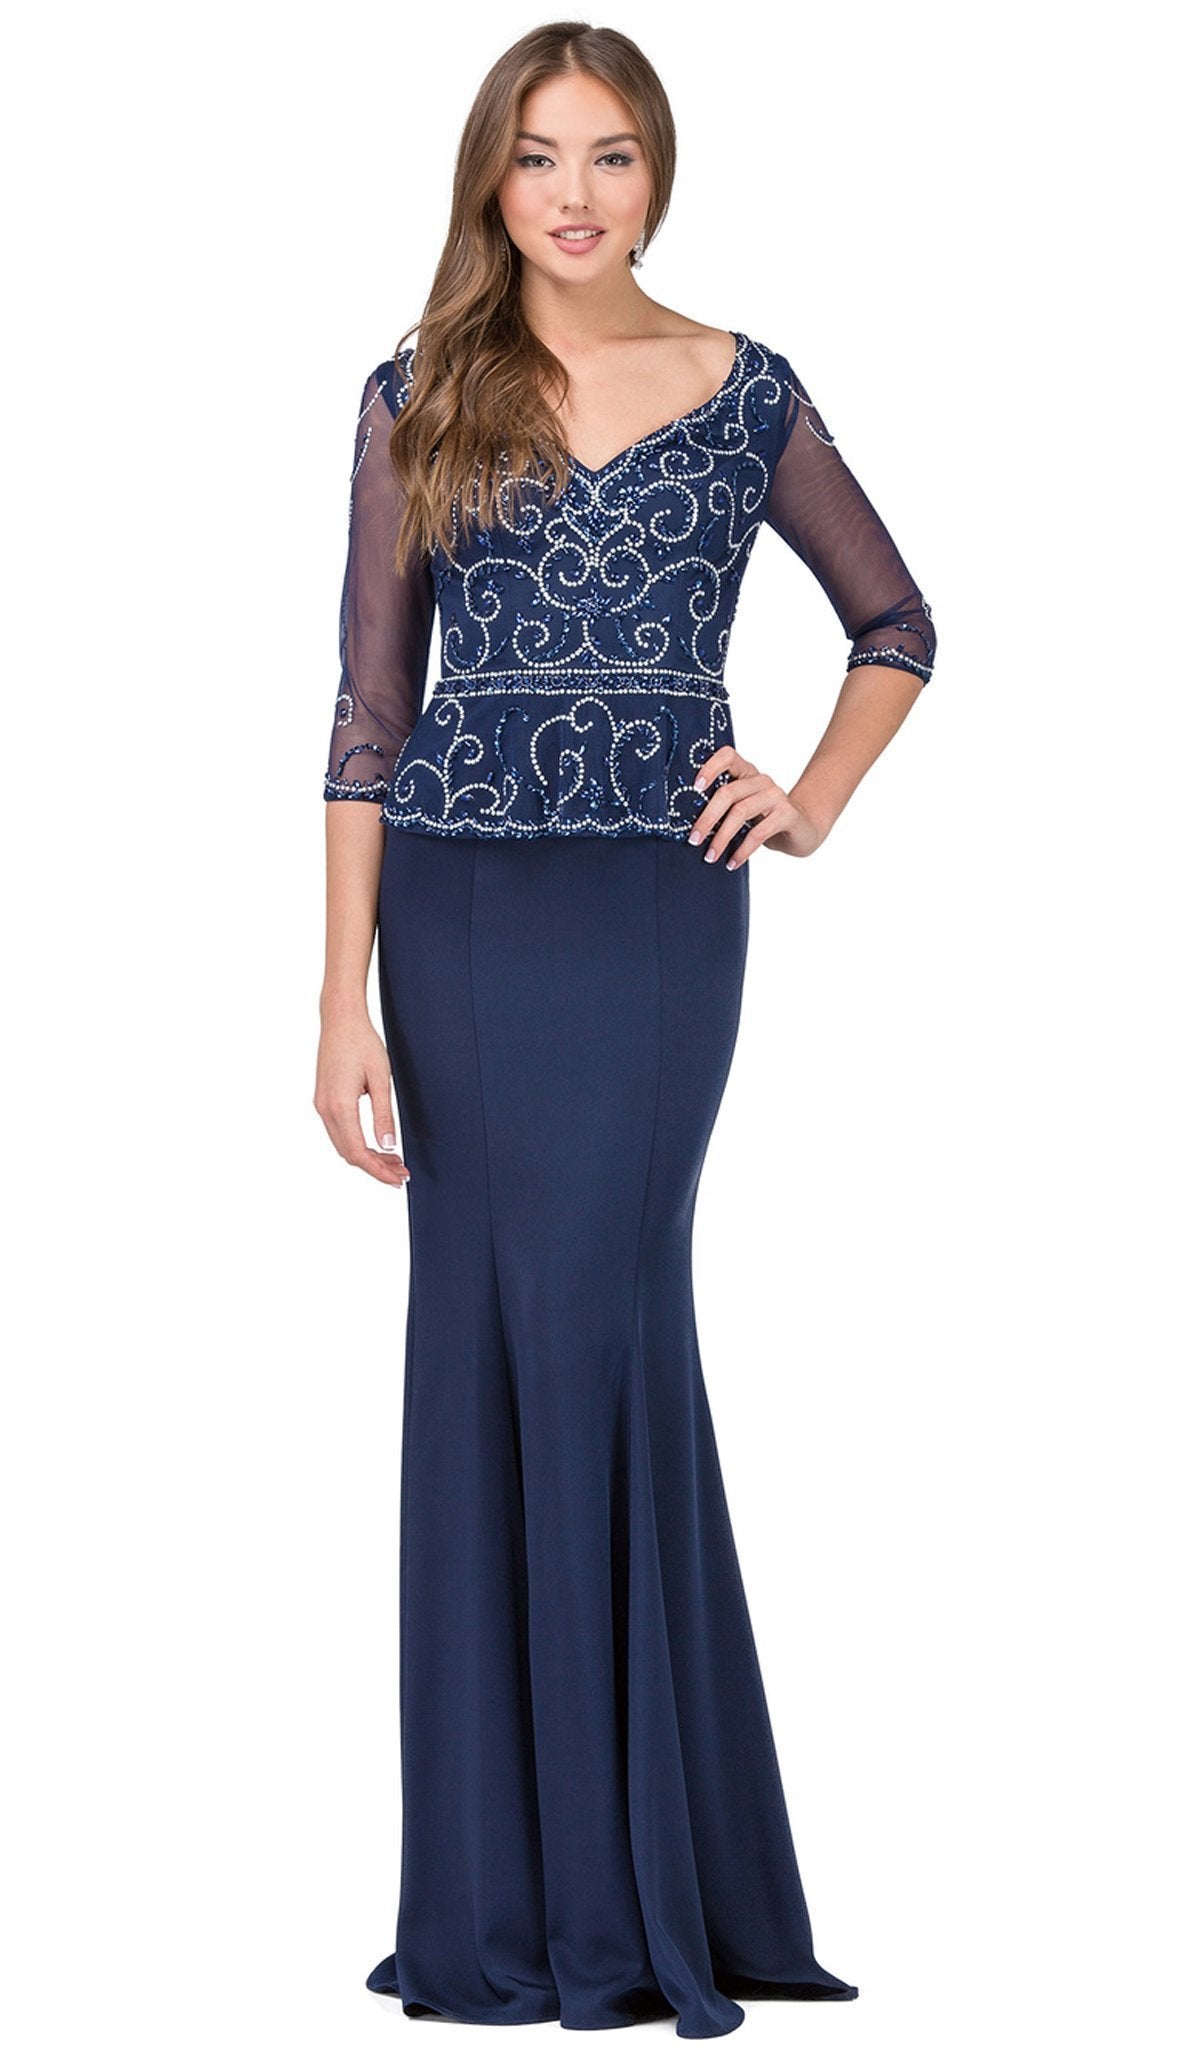 Dancing Queen - 2290 Beaded Sheer Quarter Length Sleeve Sheath Prom Dress Special Occasion Dress L / Navy